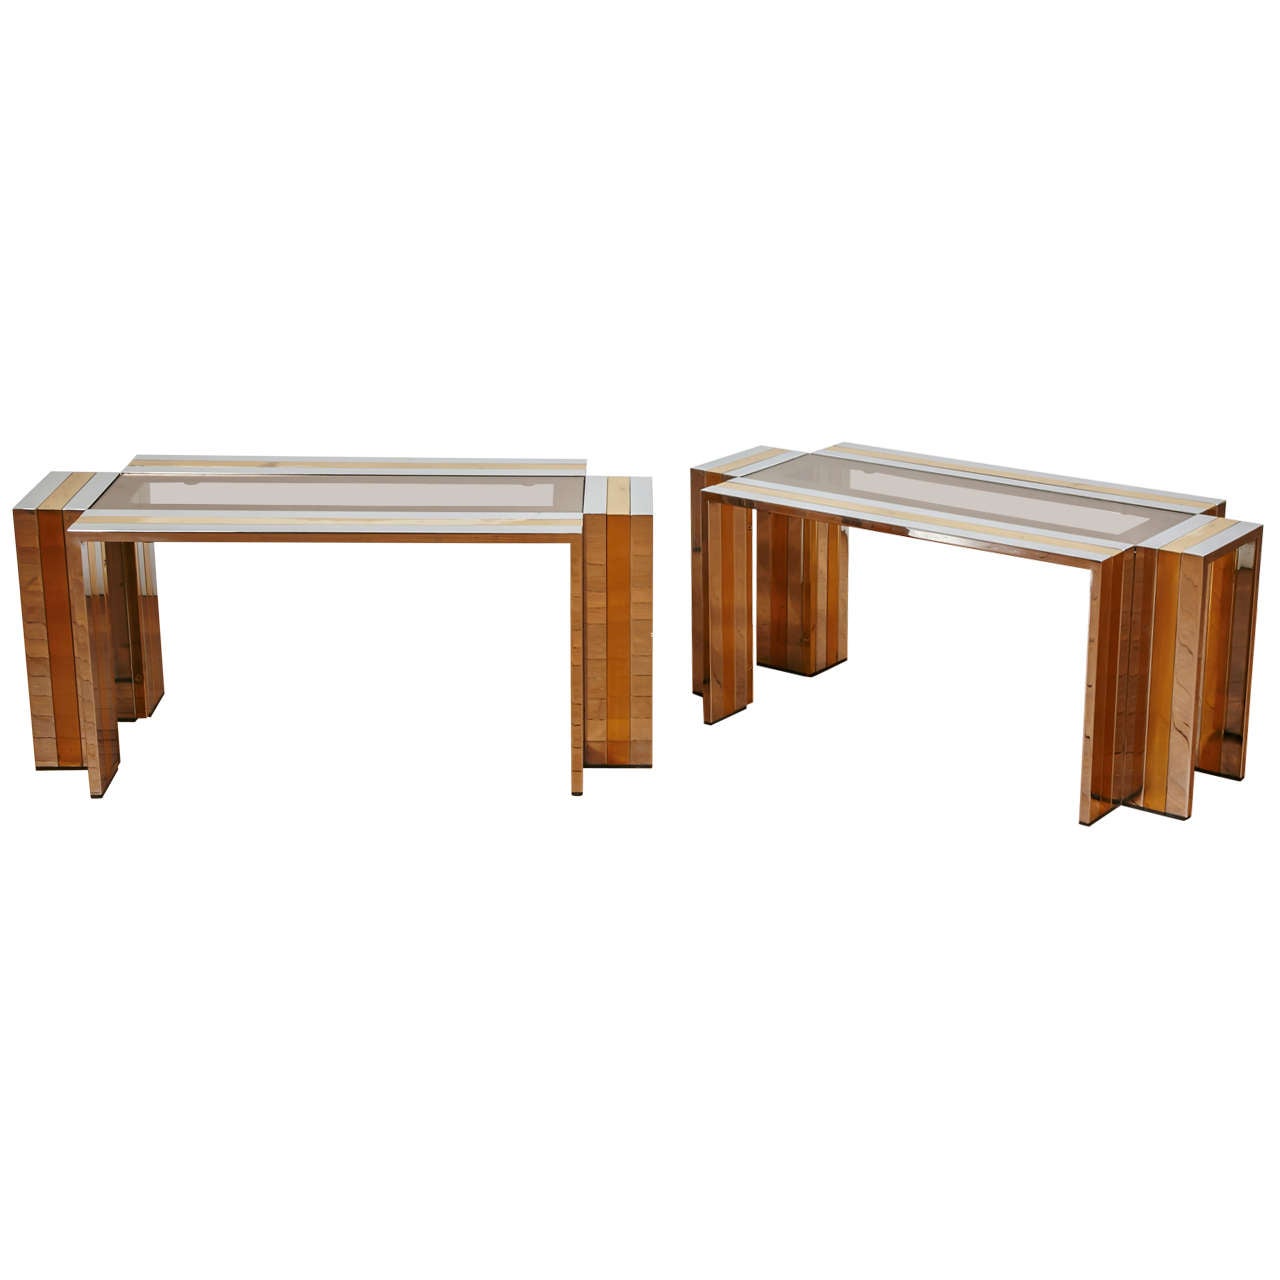 Pair of gilt brass and chromed steel coffee tables by Romeo REGA, 1970's.
Crossed rectangular shape, smoked glass top.